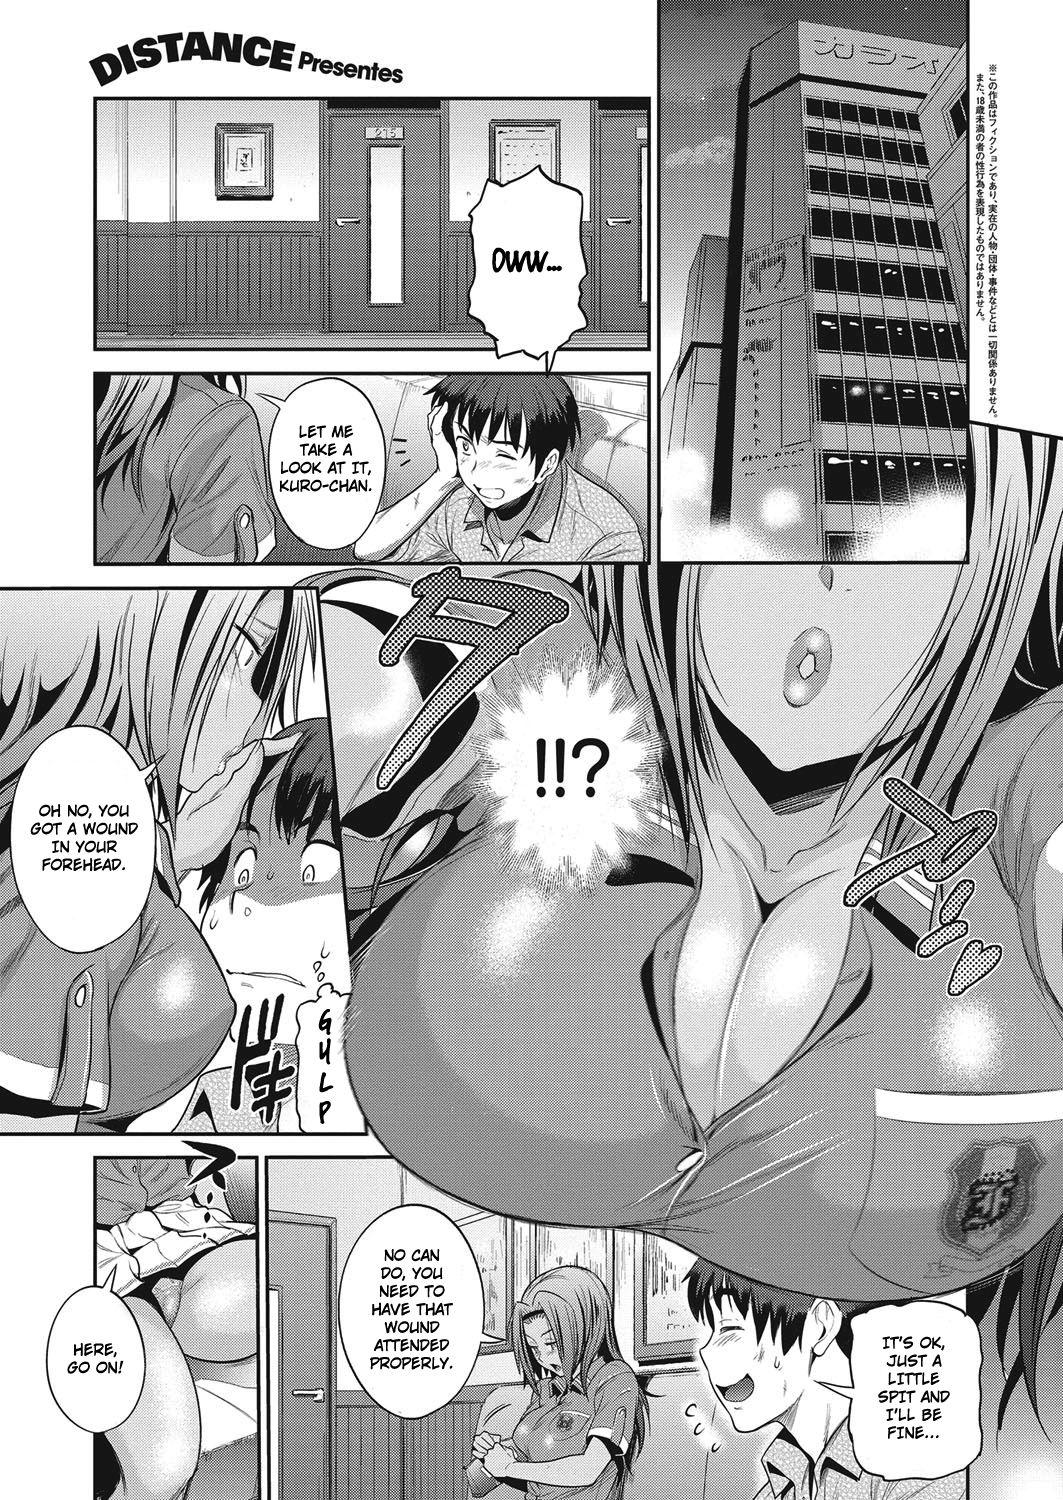 Usa [DISTANCE] Joshi Lacu! - Girls Lacrosse Club ~2 Years Later~ Ch. 3 (COMIC ExE 04) [English] [TripleSevenScans] [Digital] Amateurs Gone - Page 1